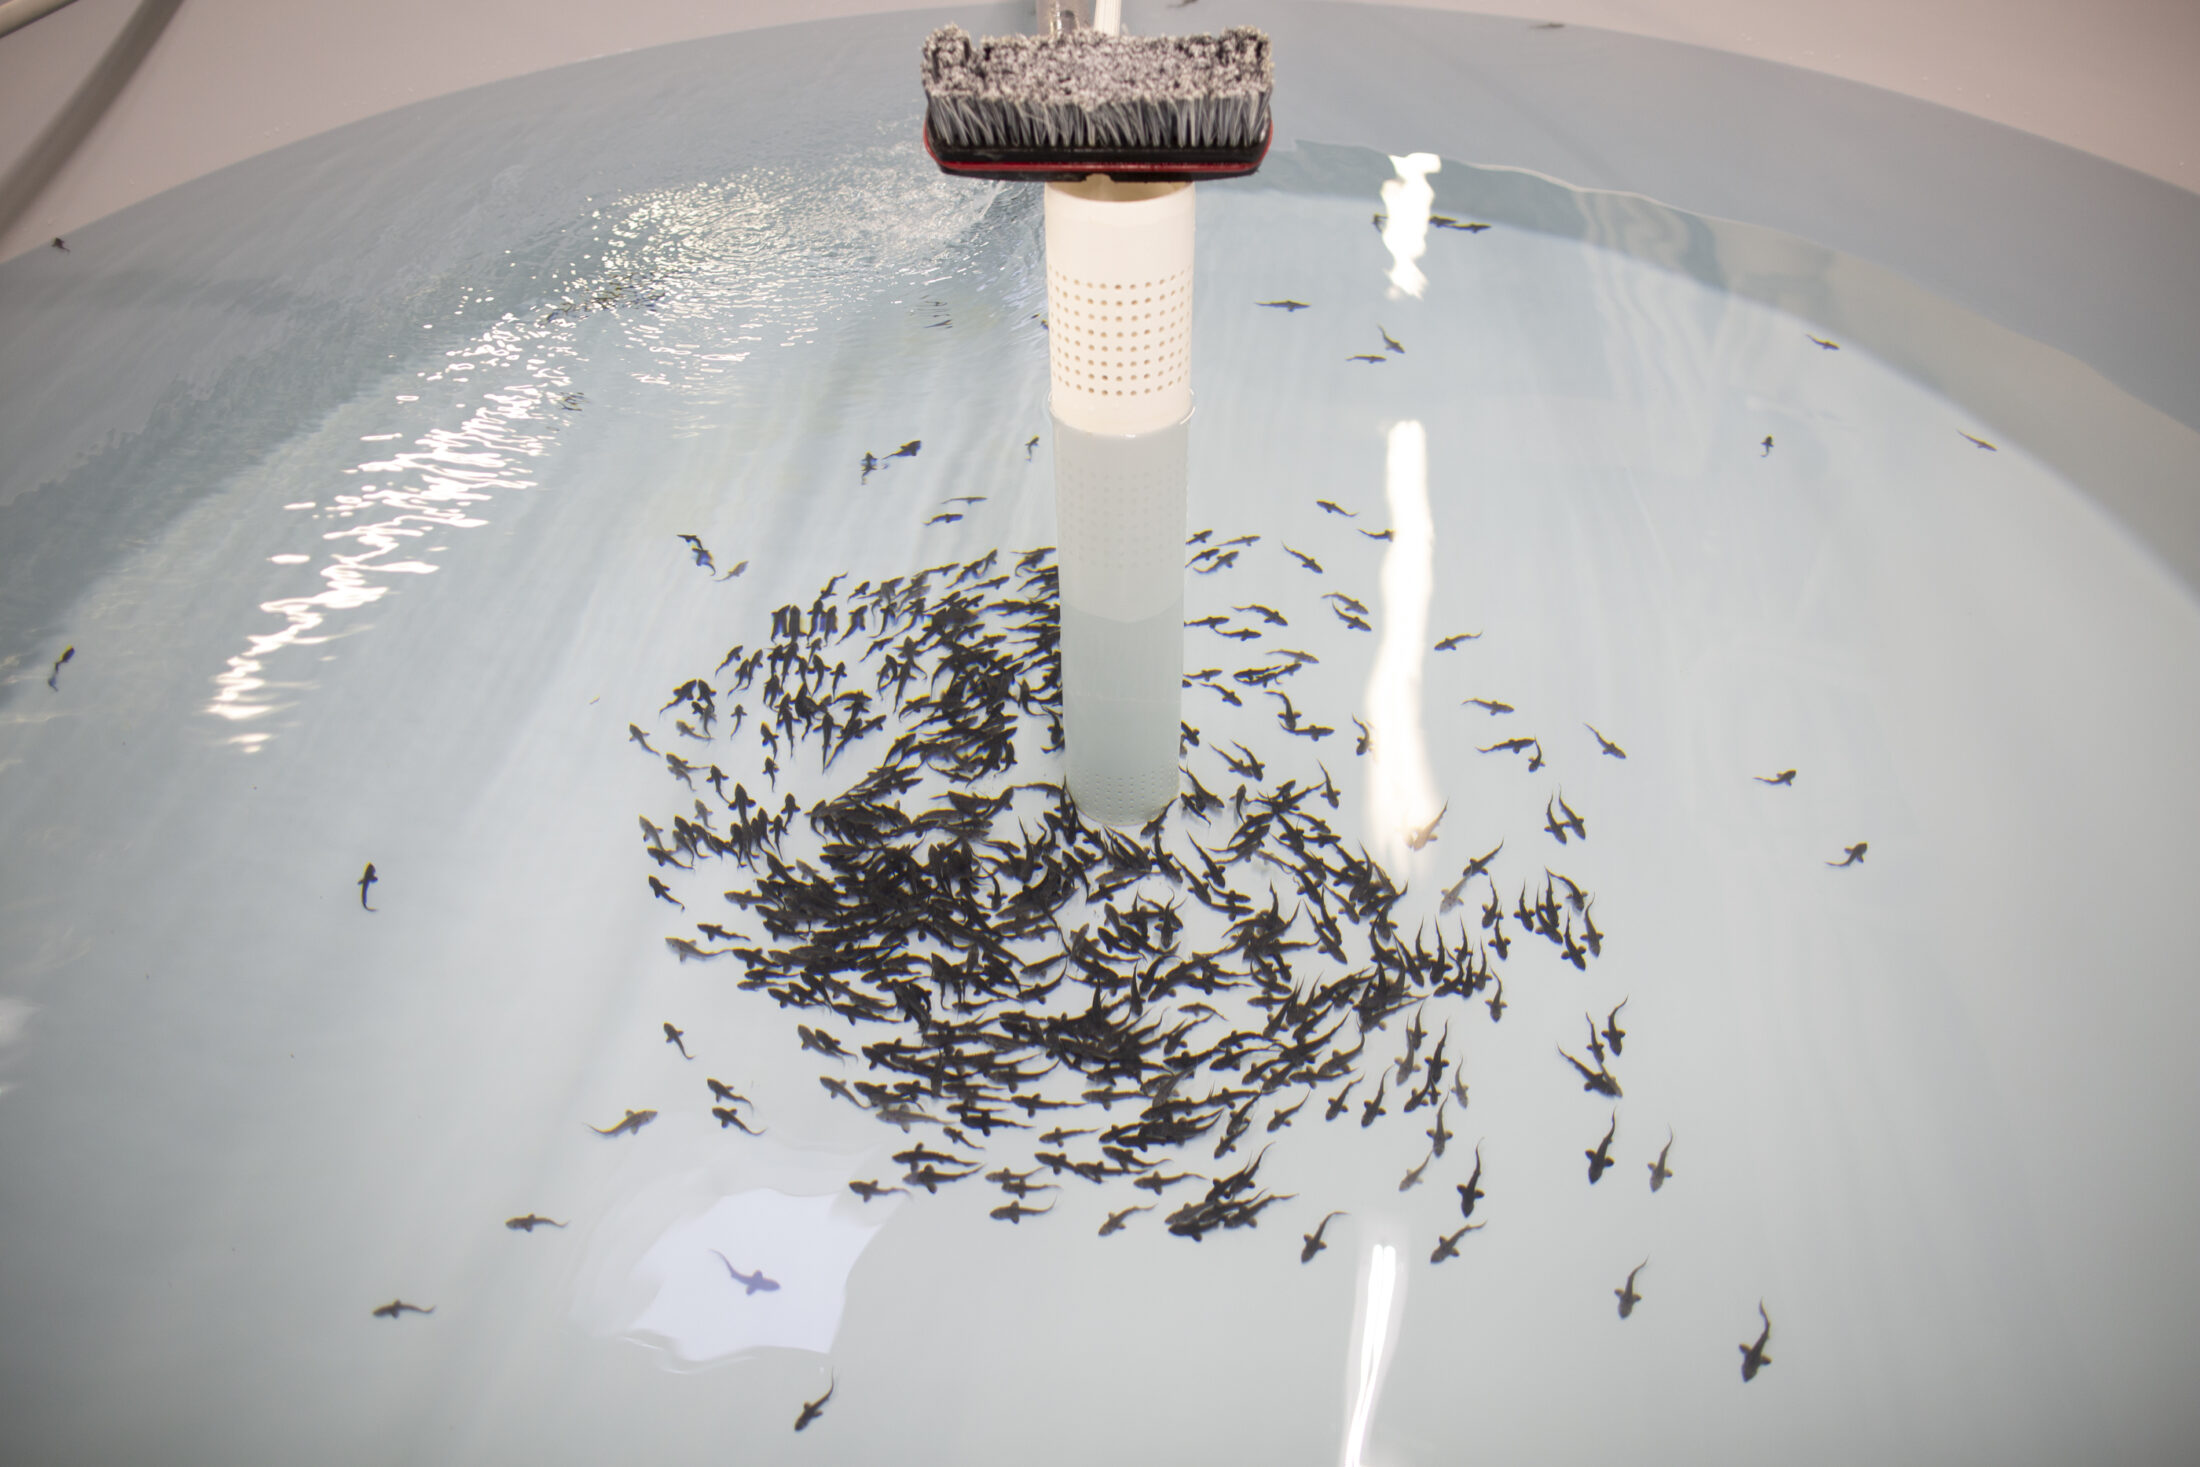 A water-filled tank holding baby sturgeon fish